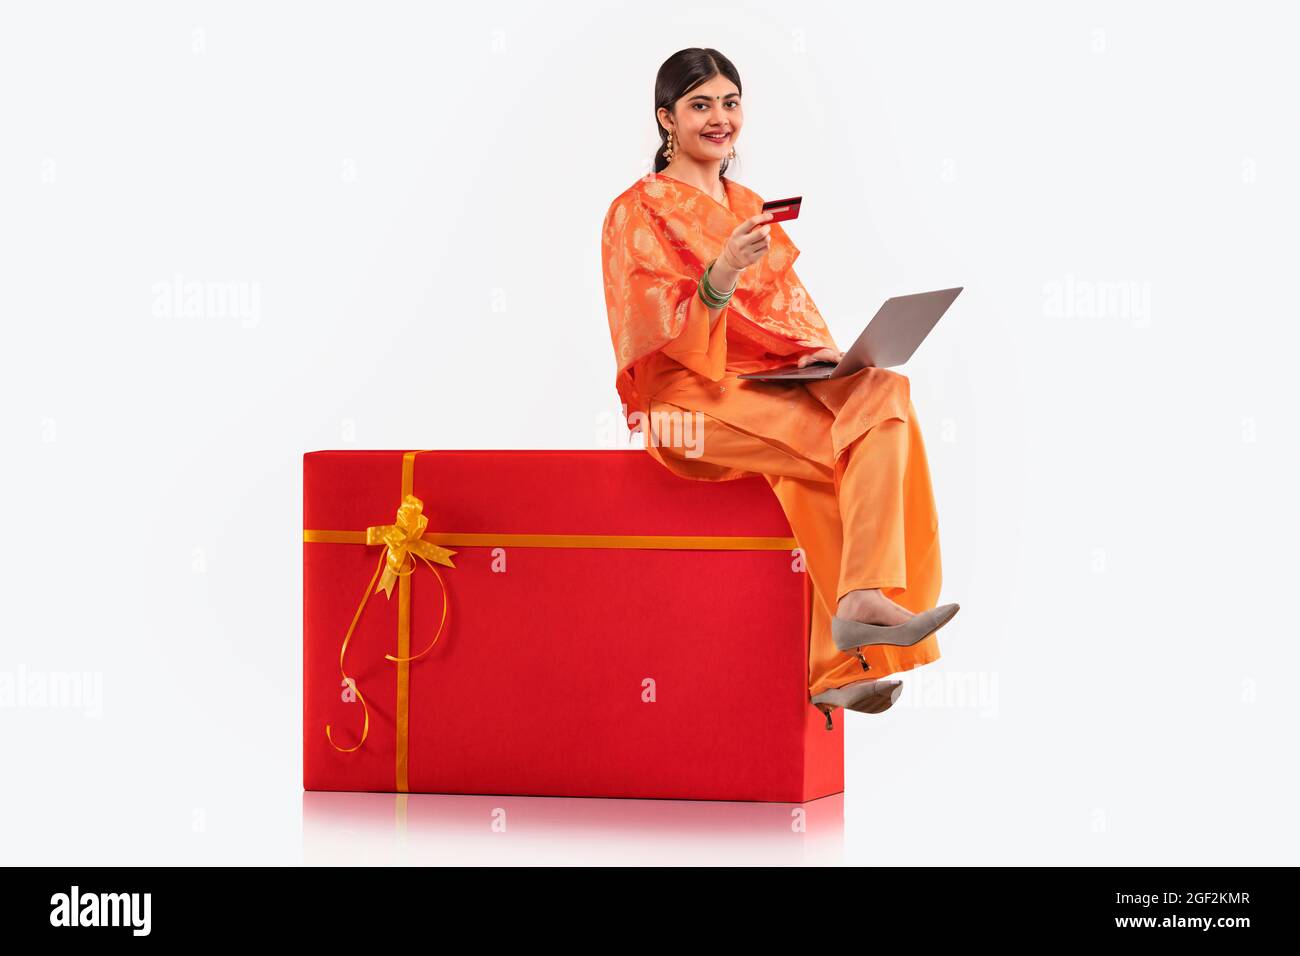 A young woman sitting on gift shaped stool making online transaction with credit card and laptop. Stock Photo